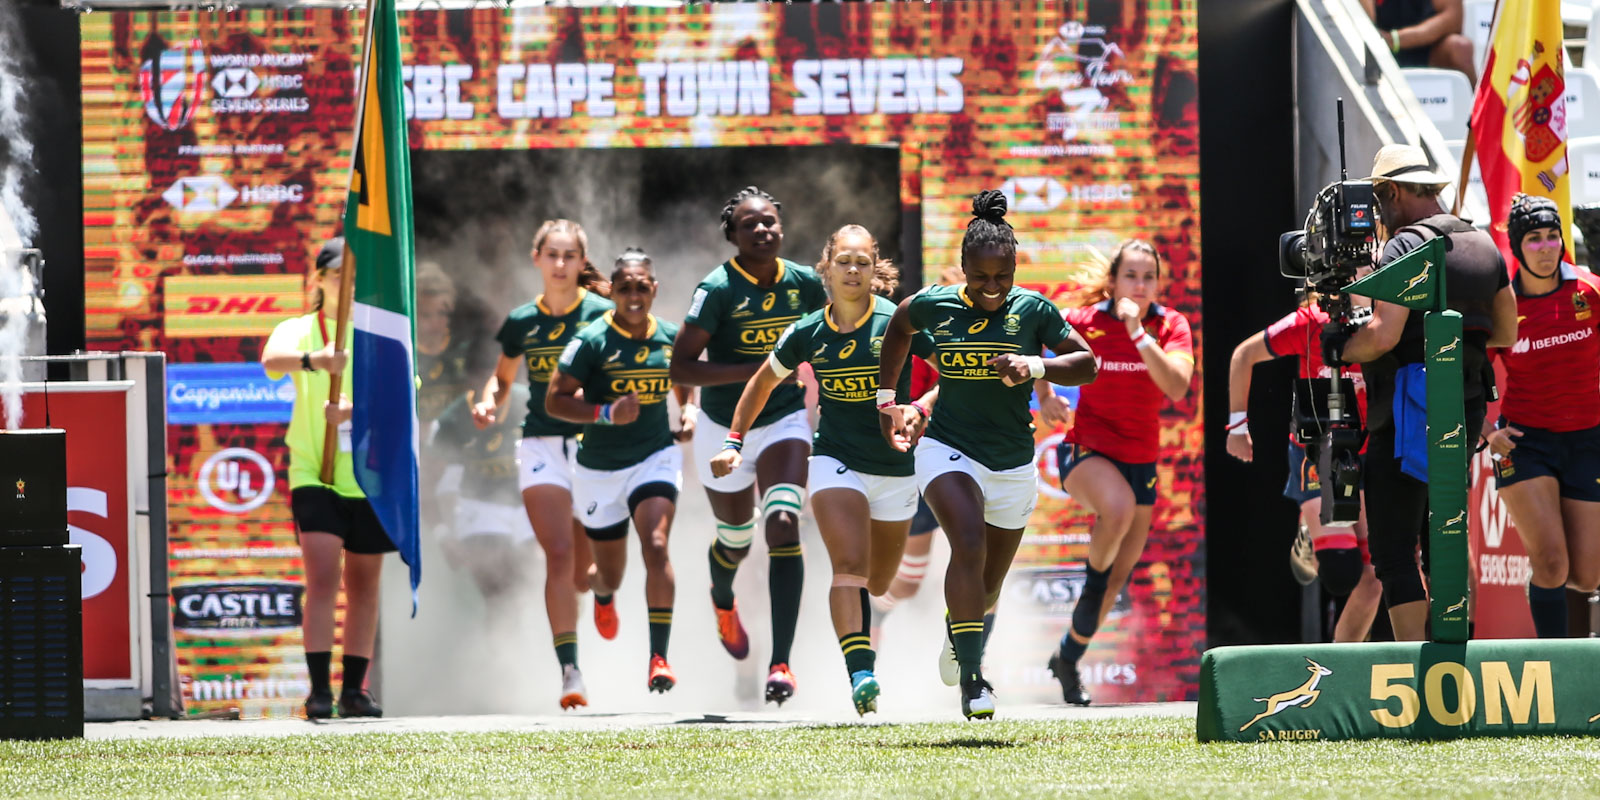 The Imbokodo made their debut at the 2019 HSBC Cape Town Sevens.